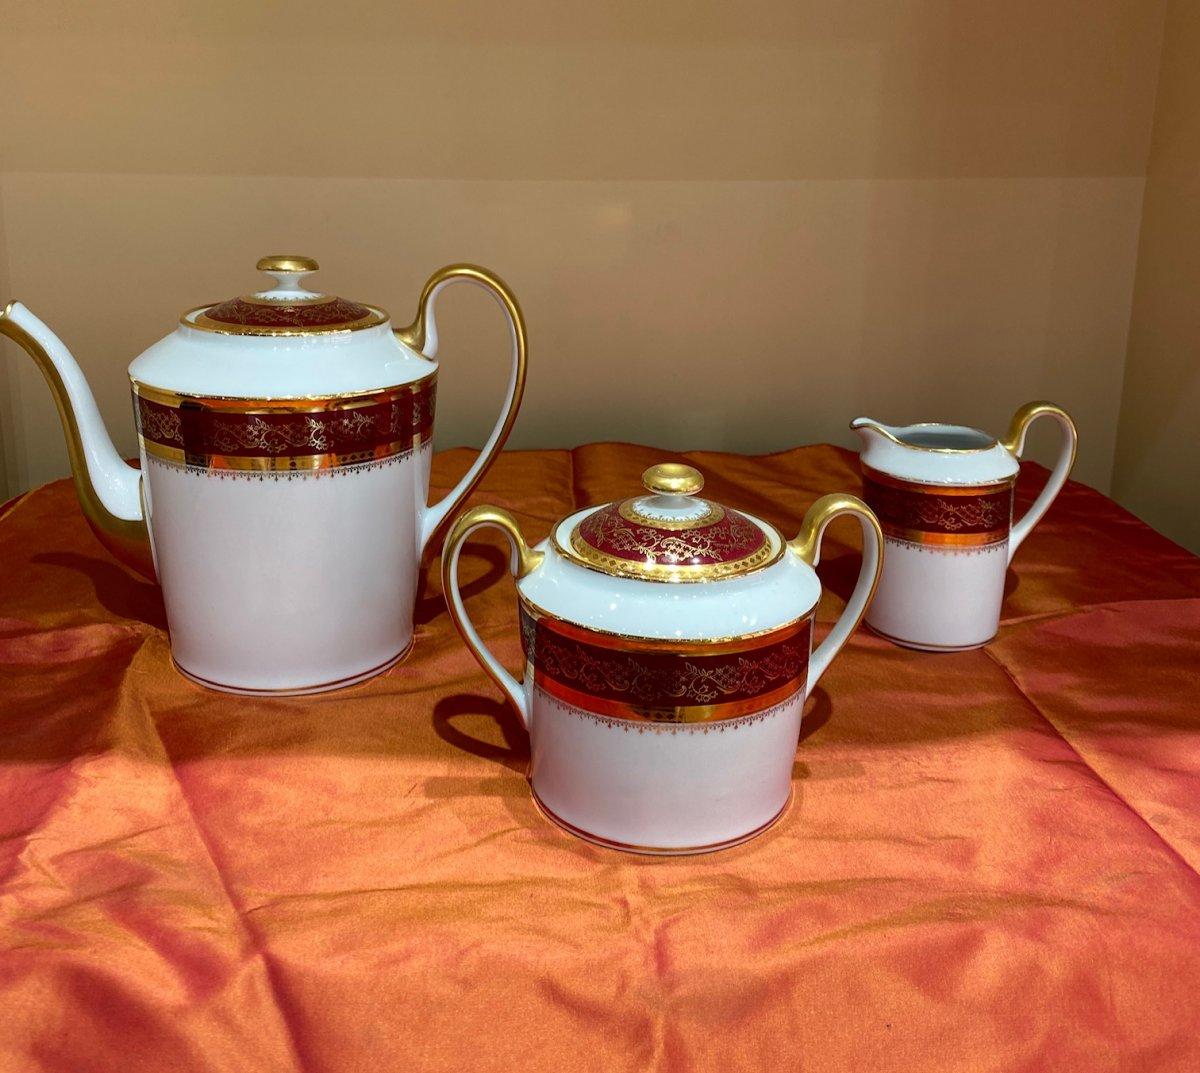 SET OF 10 COFFEE CUPS AND SAUCERS IN WHITE PORCELAIN WITH RED AND GOLD DECORATION. A COFFEE POT, A SUGAR POT AND A MILK JUG. THESE PIECES BEAR THE STAMP “Limoges S J France” Origin: French manufacture in LIMOGES / France Period: Mid-20th century.